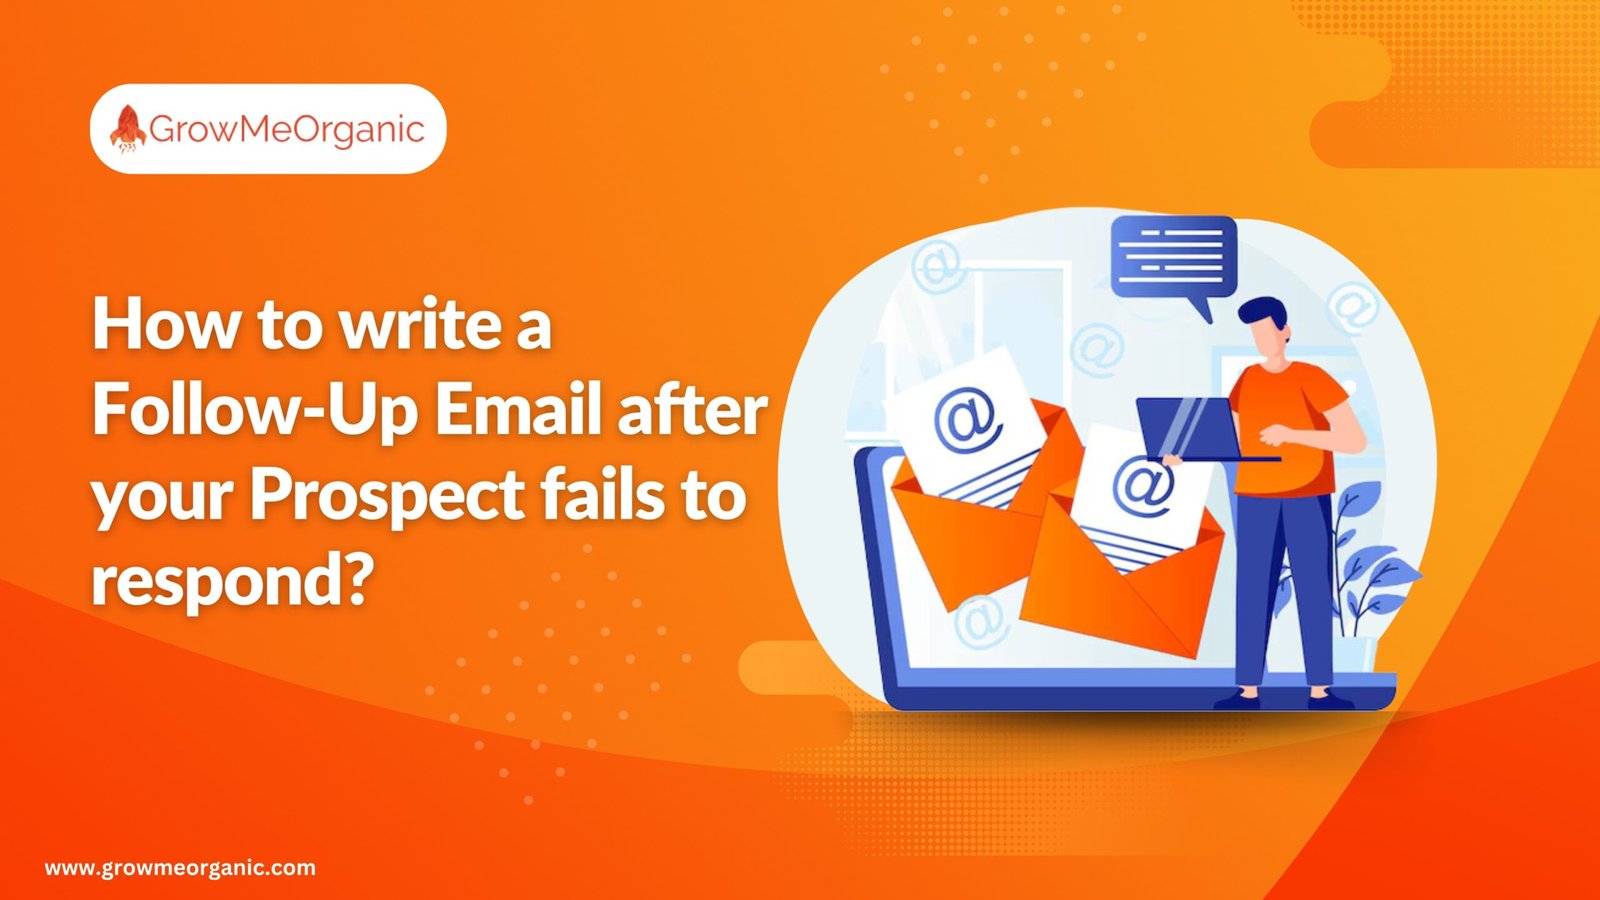 How to write a Follow-Up Email after your Prospect fails to respond?